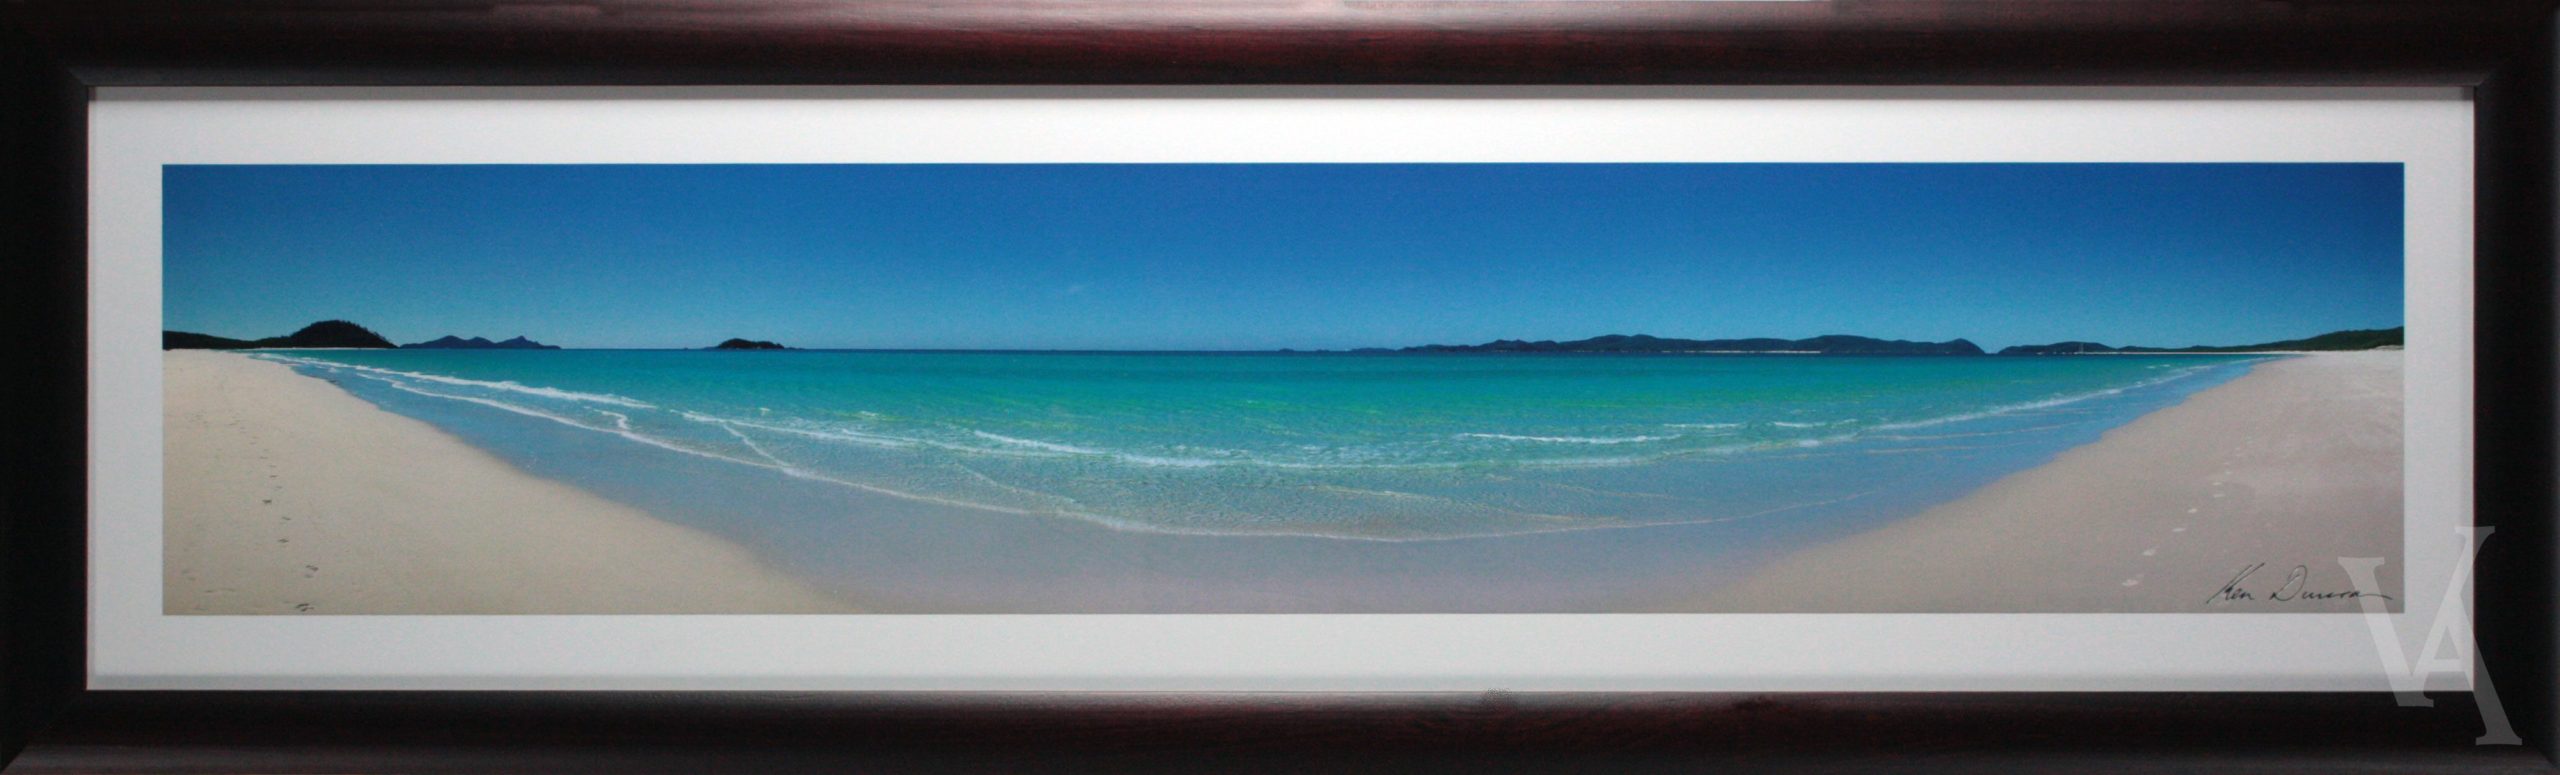 Ken Duncan Photography Framed Signature Series Art Print. Whitehaven Beach Panoramic Signed Photo.